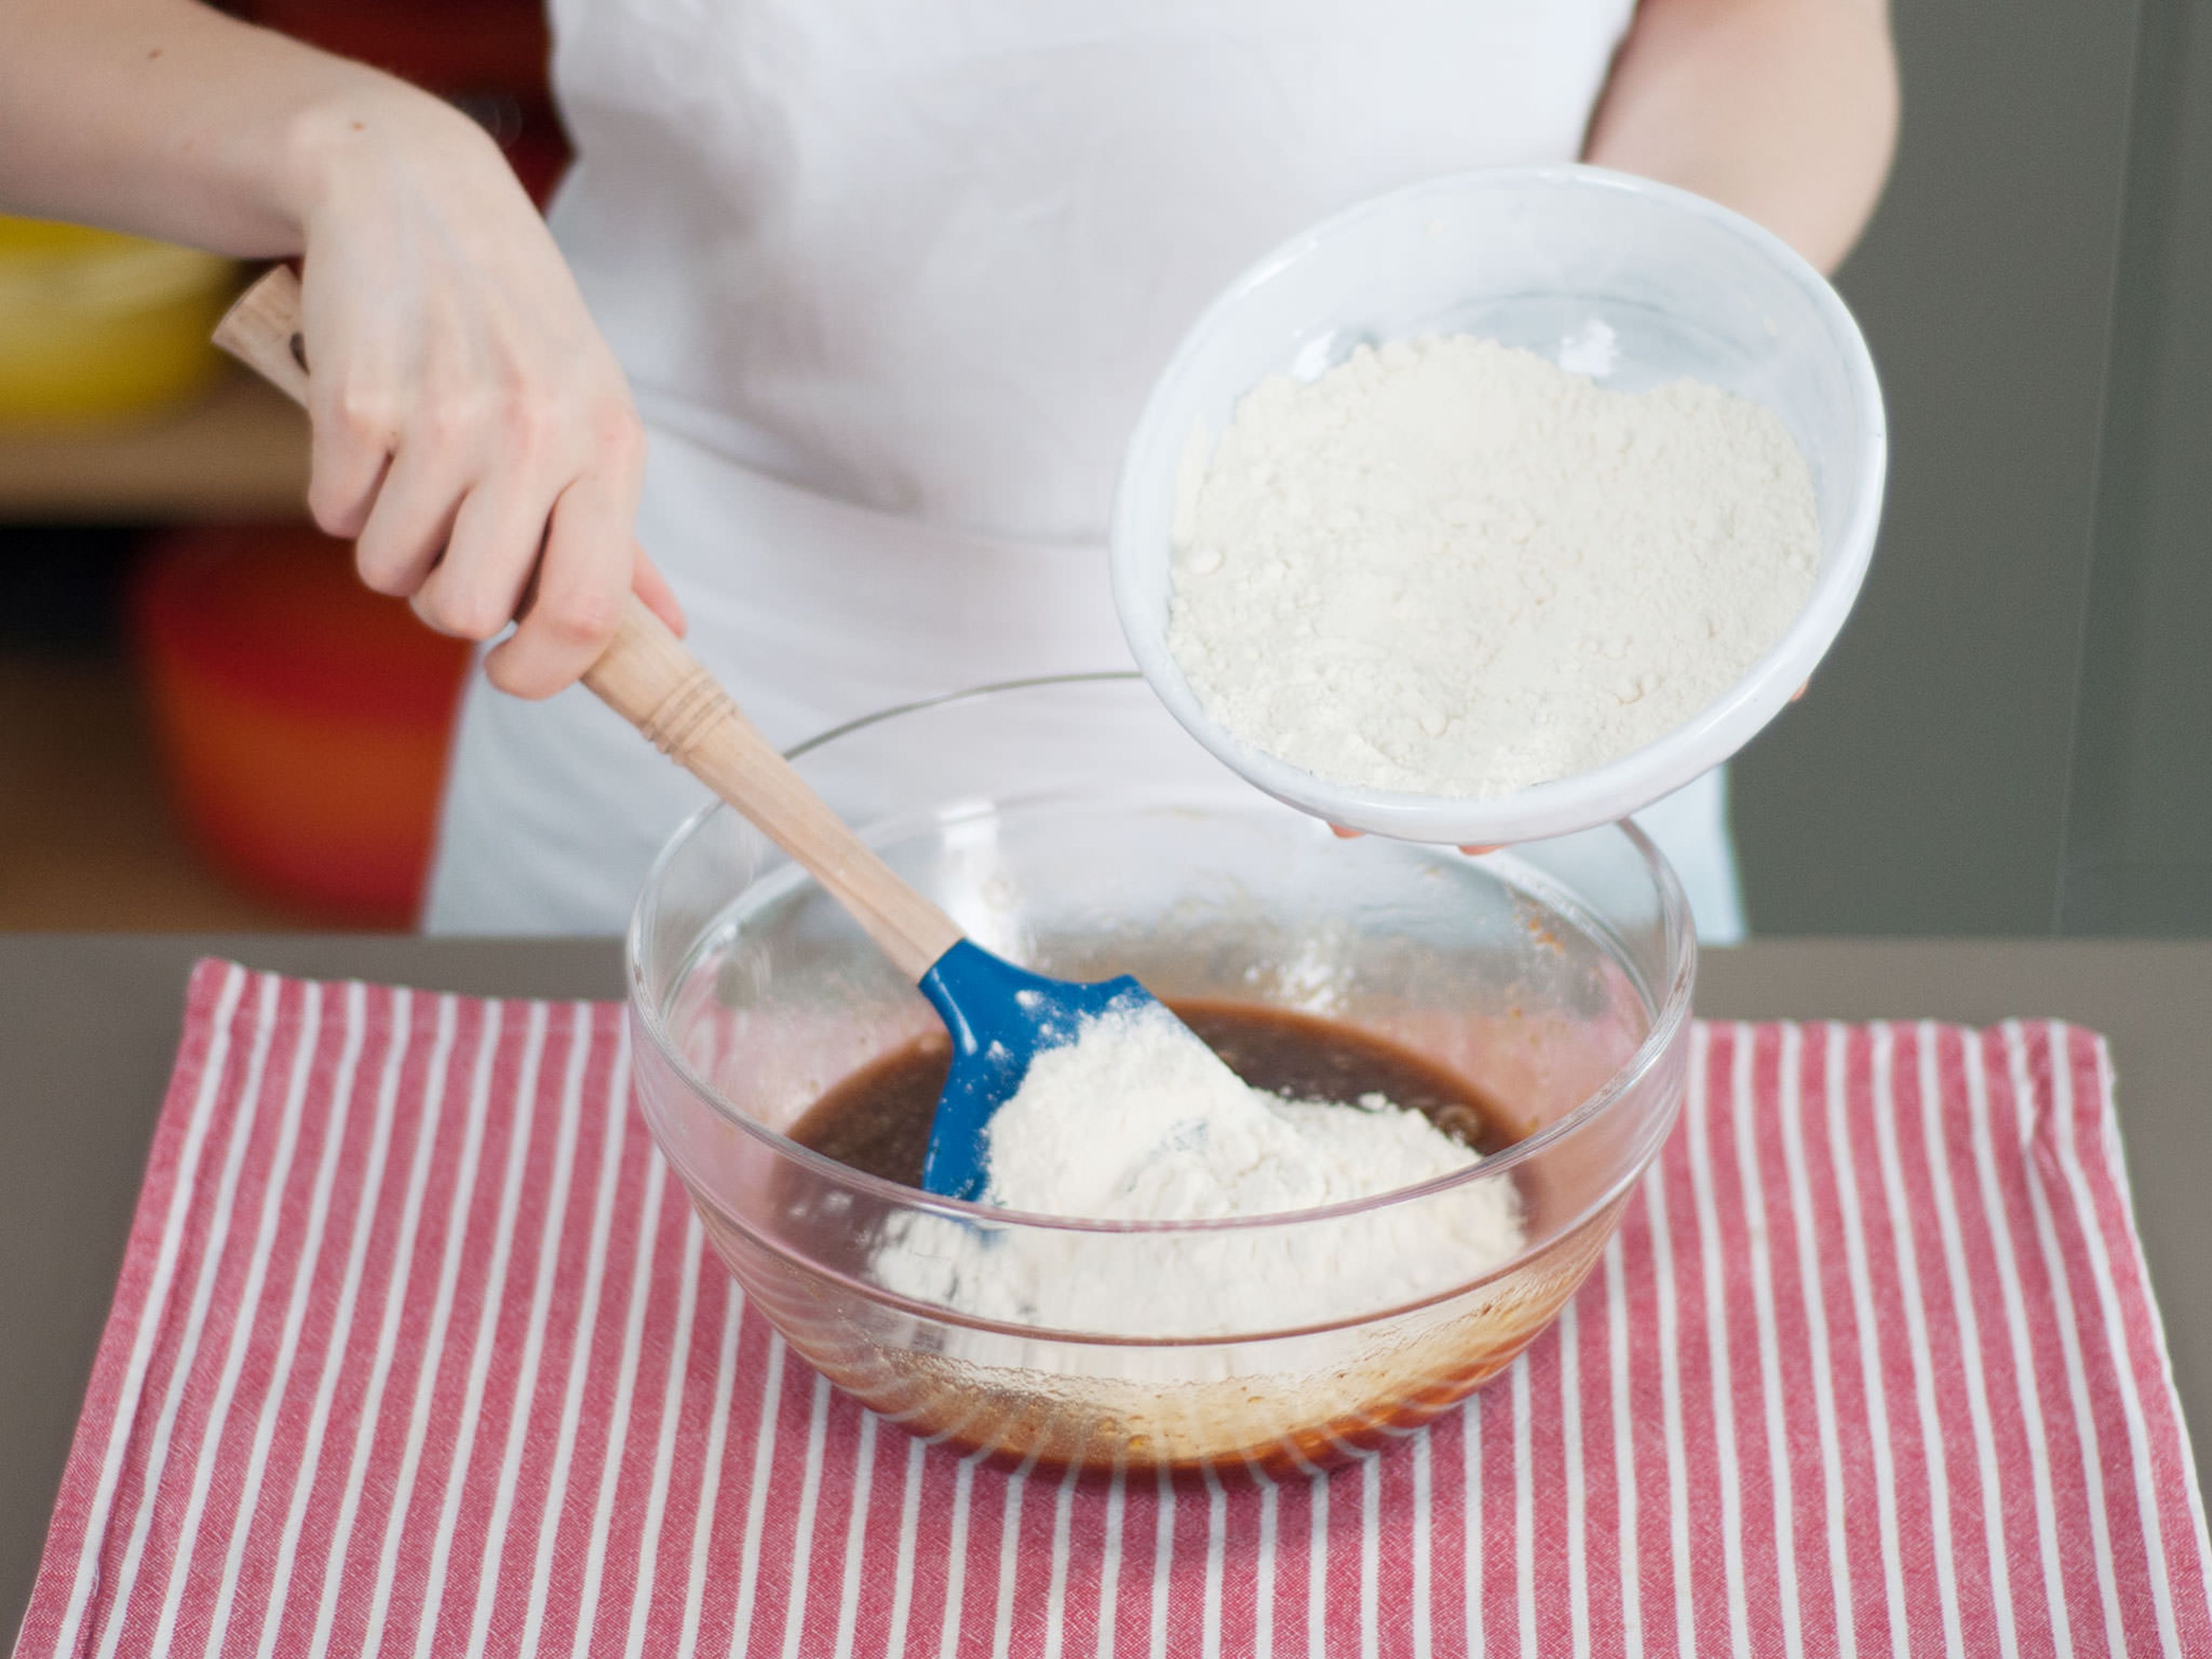 Whisk together flour and salt in a small bowl. Stir into butter mixture and beat until combined.